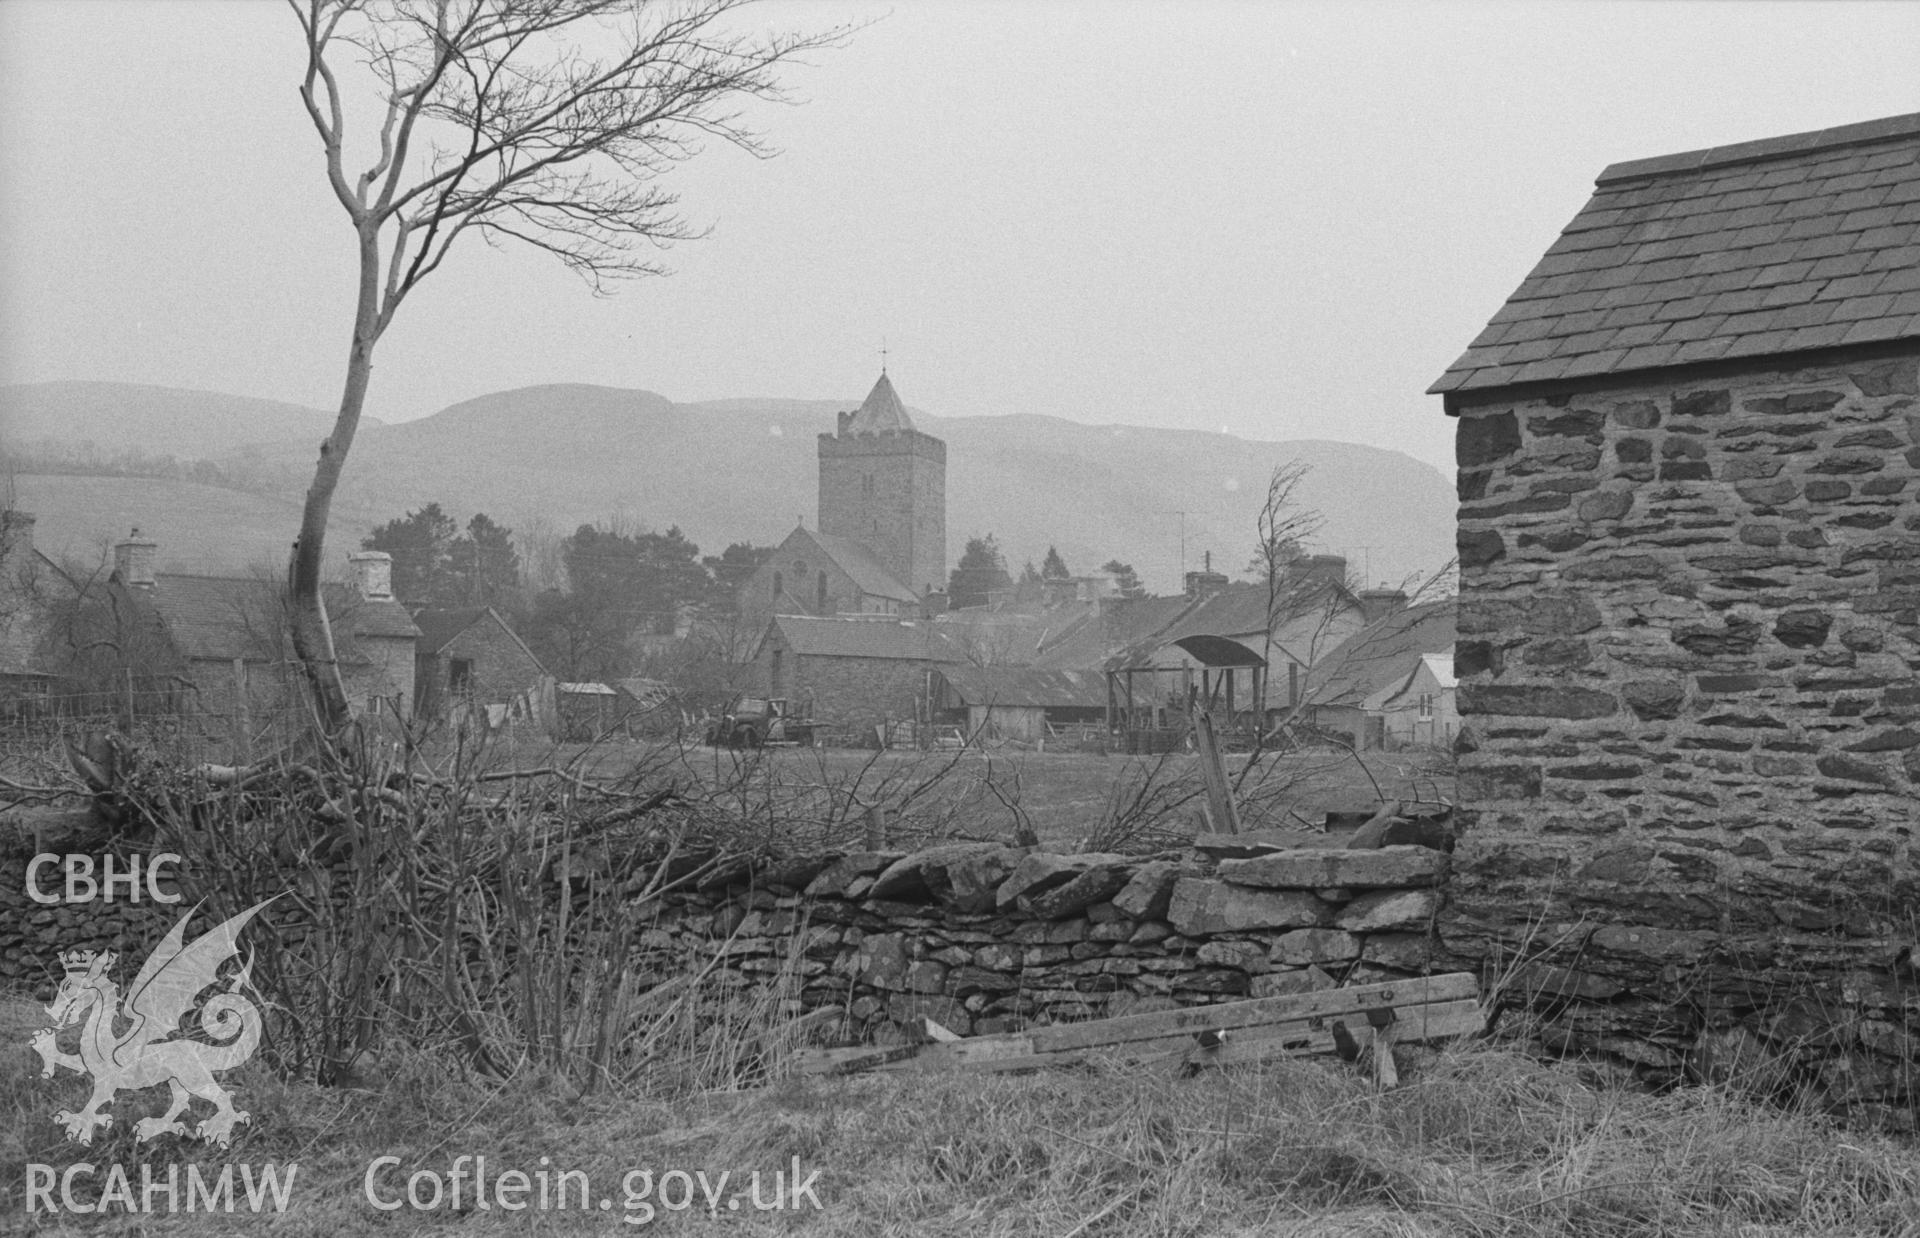 Digital copy of a black and white negative showing a prominent St David's Church in the village of Llanddewi Brefi. Photographed in April 1963 by Arthur O. Chater, from Grid Reference SN 6617 5532, looking east.